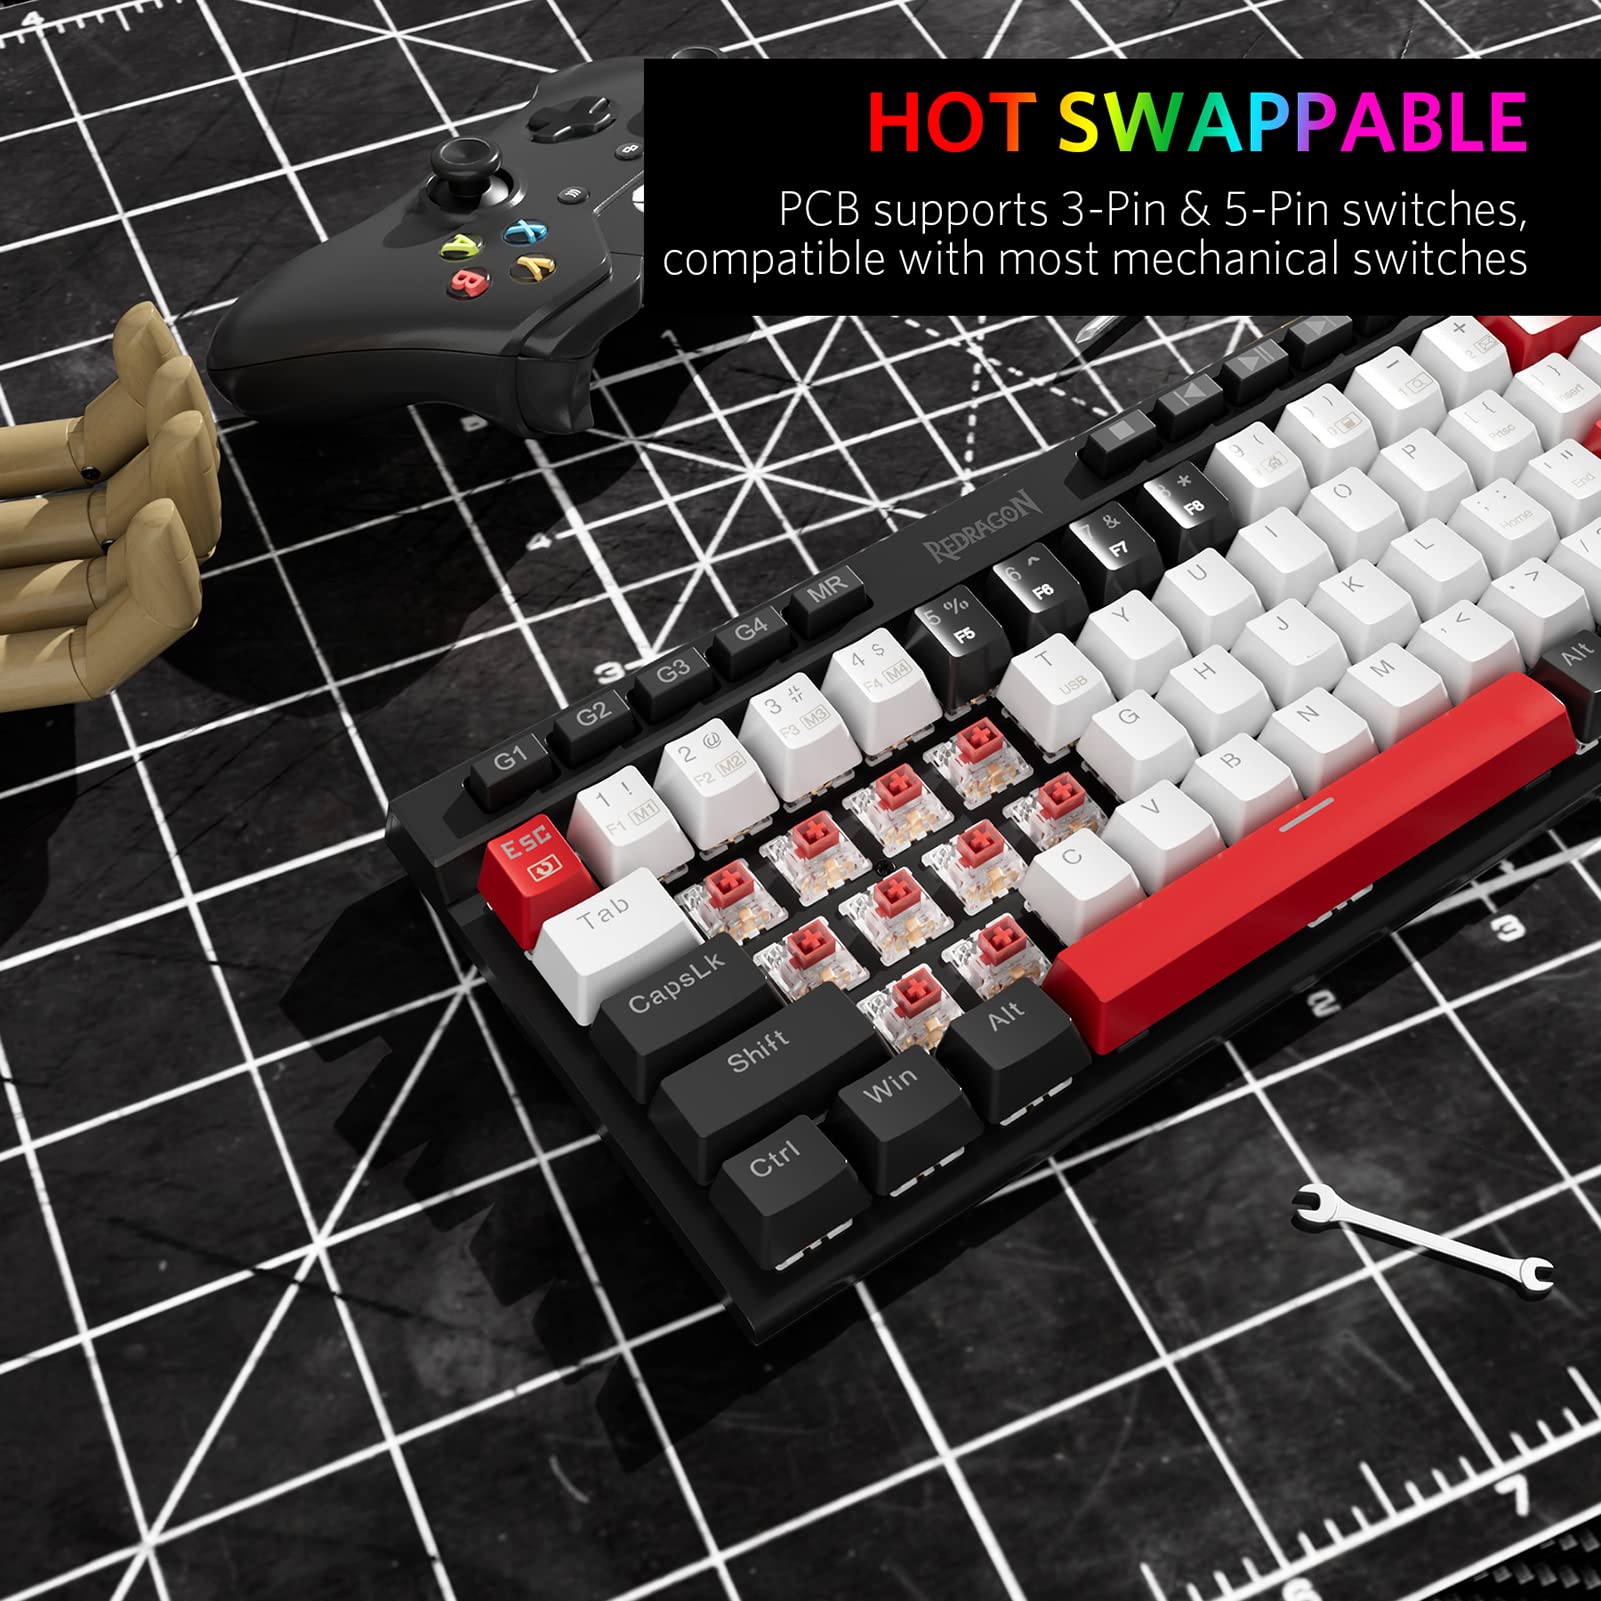 Redragon K635 Hot Swappable Mechanical Keyboard Customized RGB Backlit with Volume Control, Bluetooth/2.4G-Wireless/USB-C Compact Gaming Keyboard with Red Switches(68+10Keys)